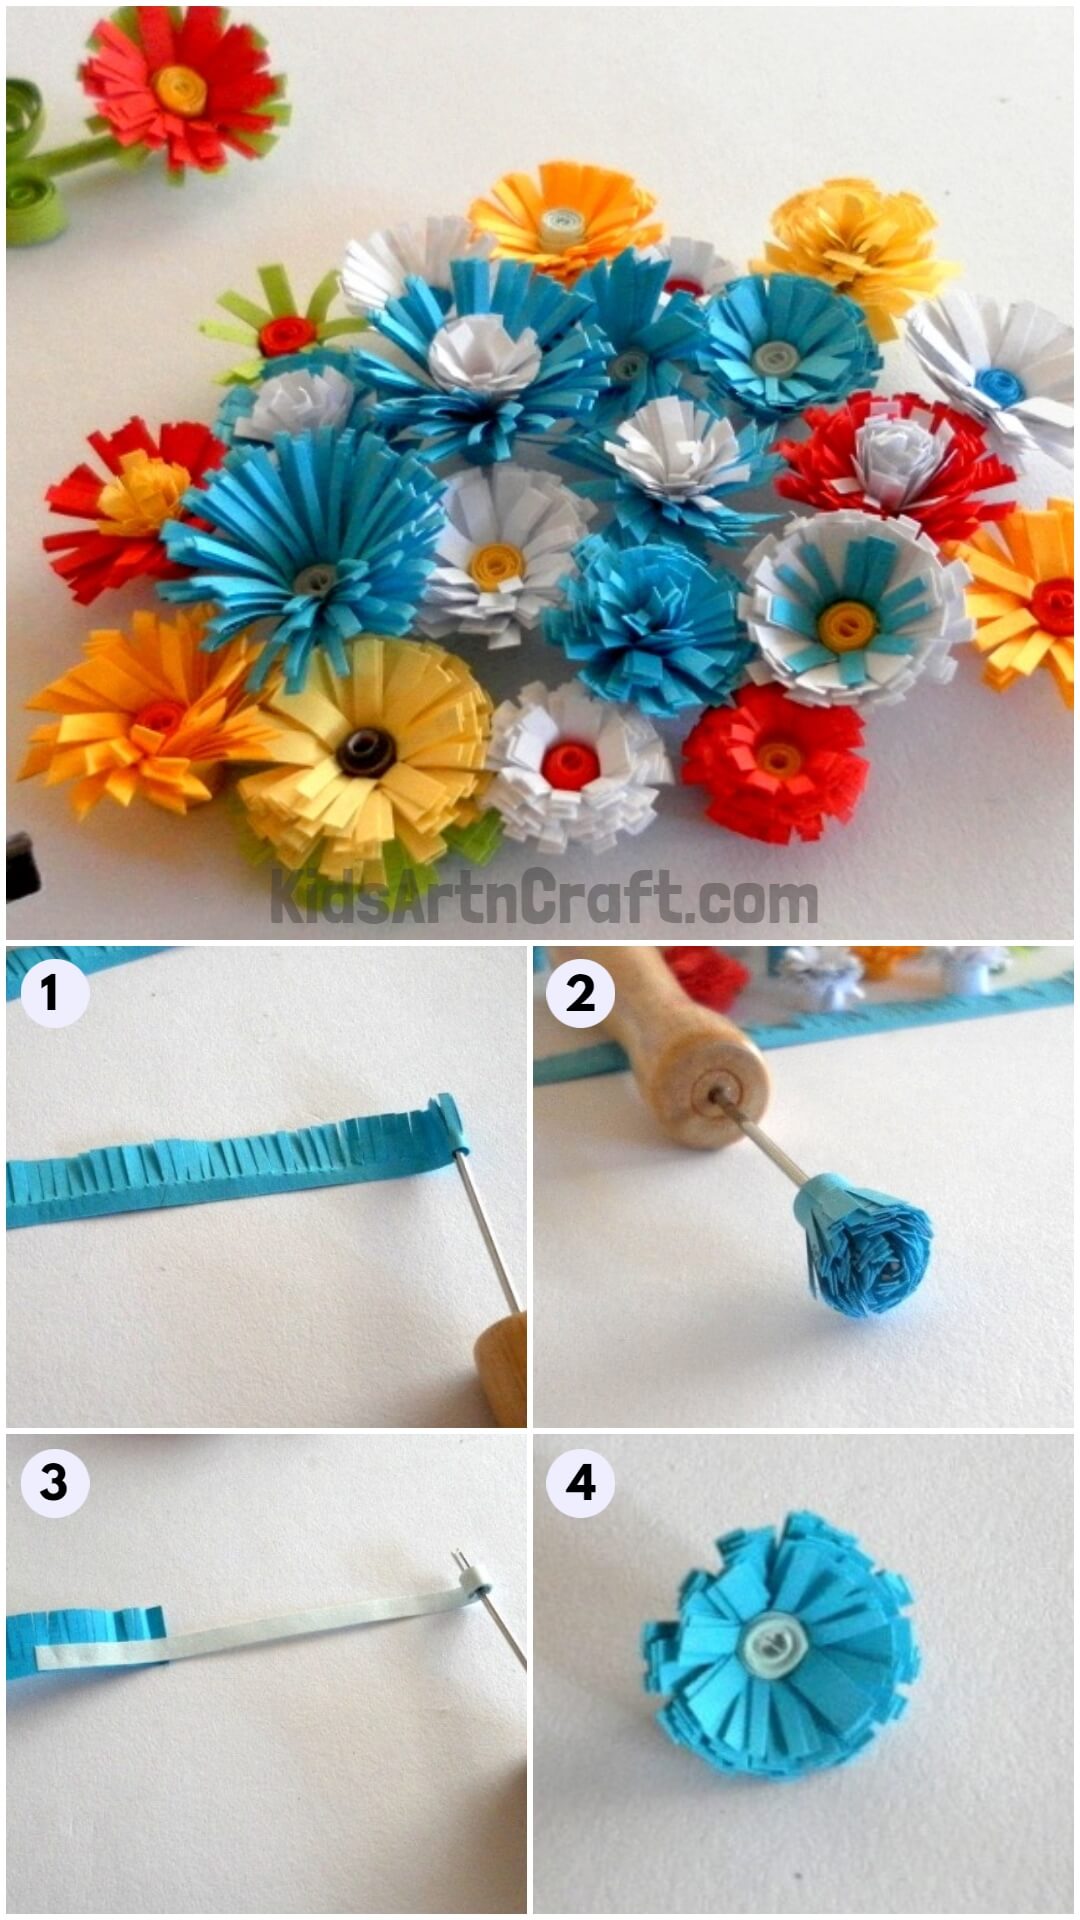 Learn to Make Simple & Multicolor Fringed Quilling Flower